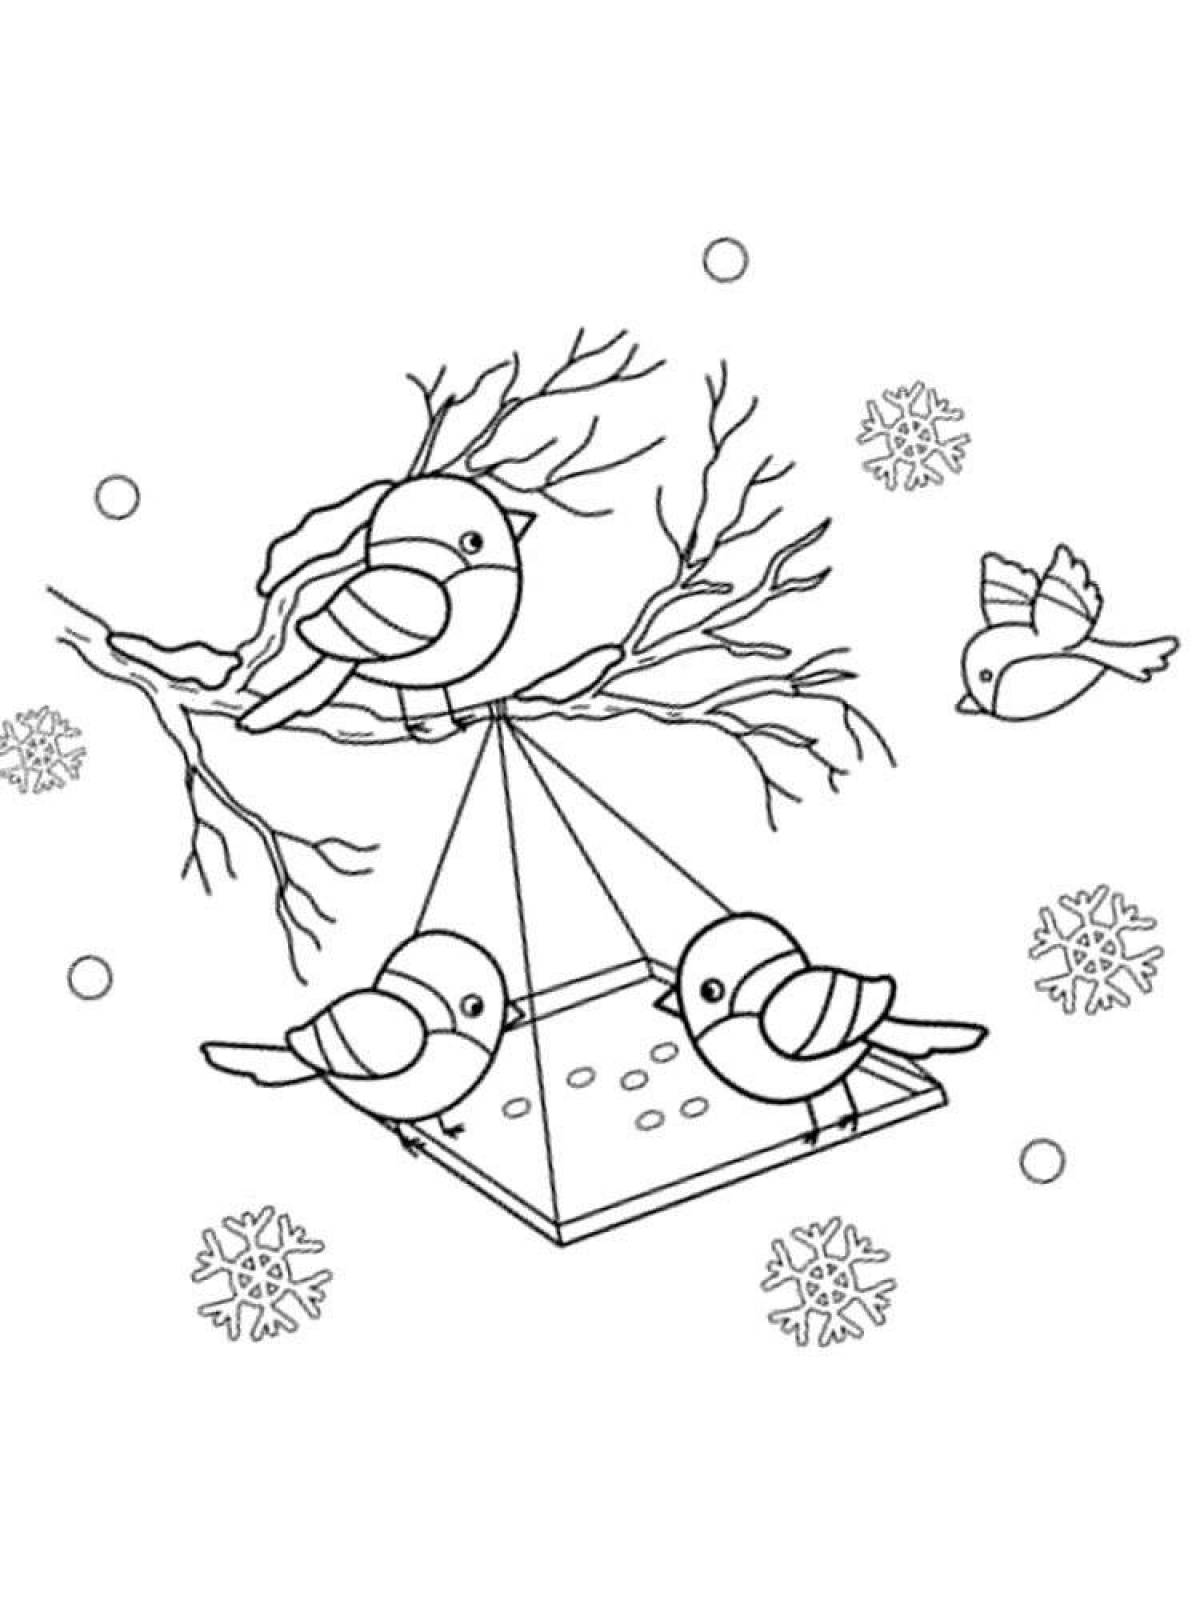 Incredible tit coloring book for kids